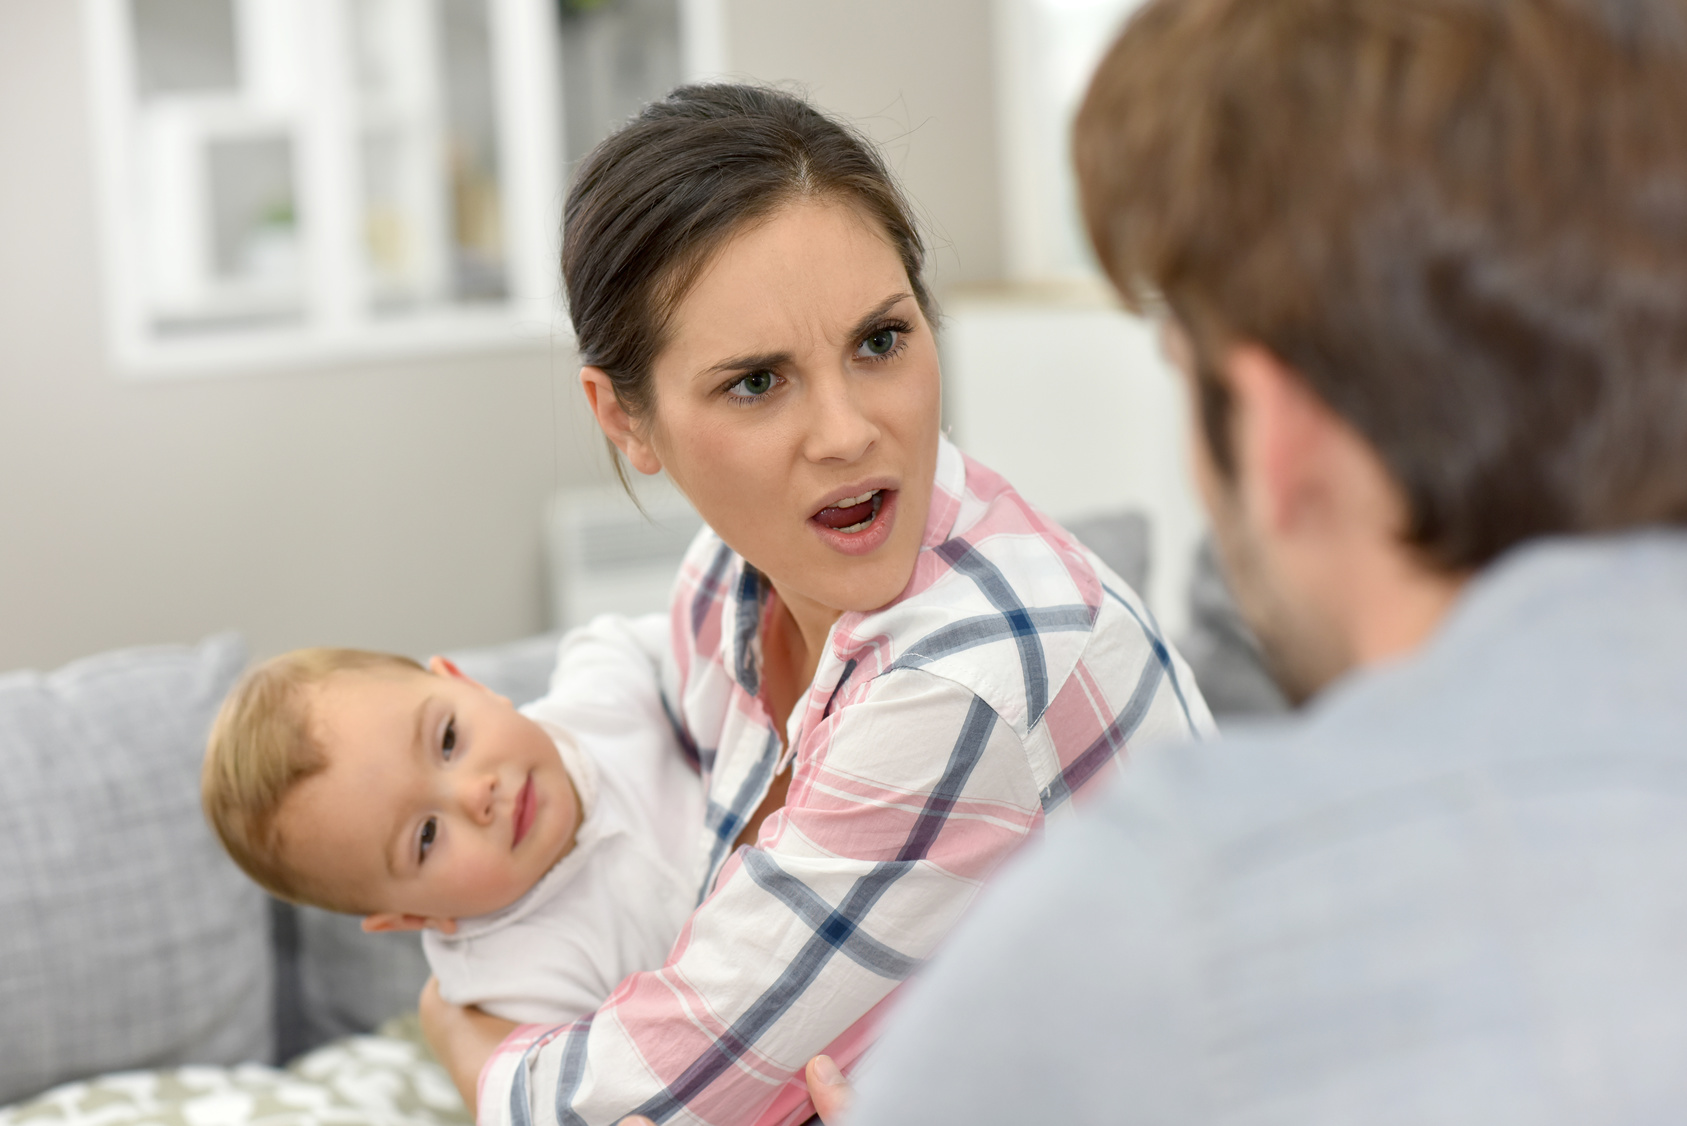 Man and woman arguing in front of baby